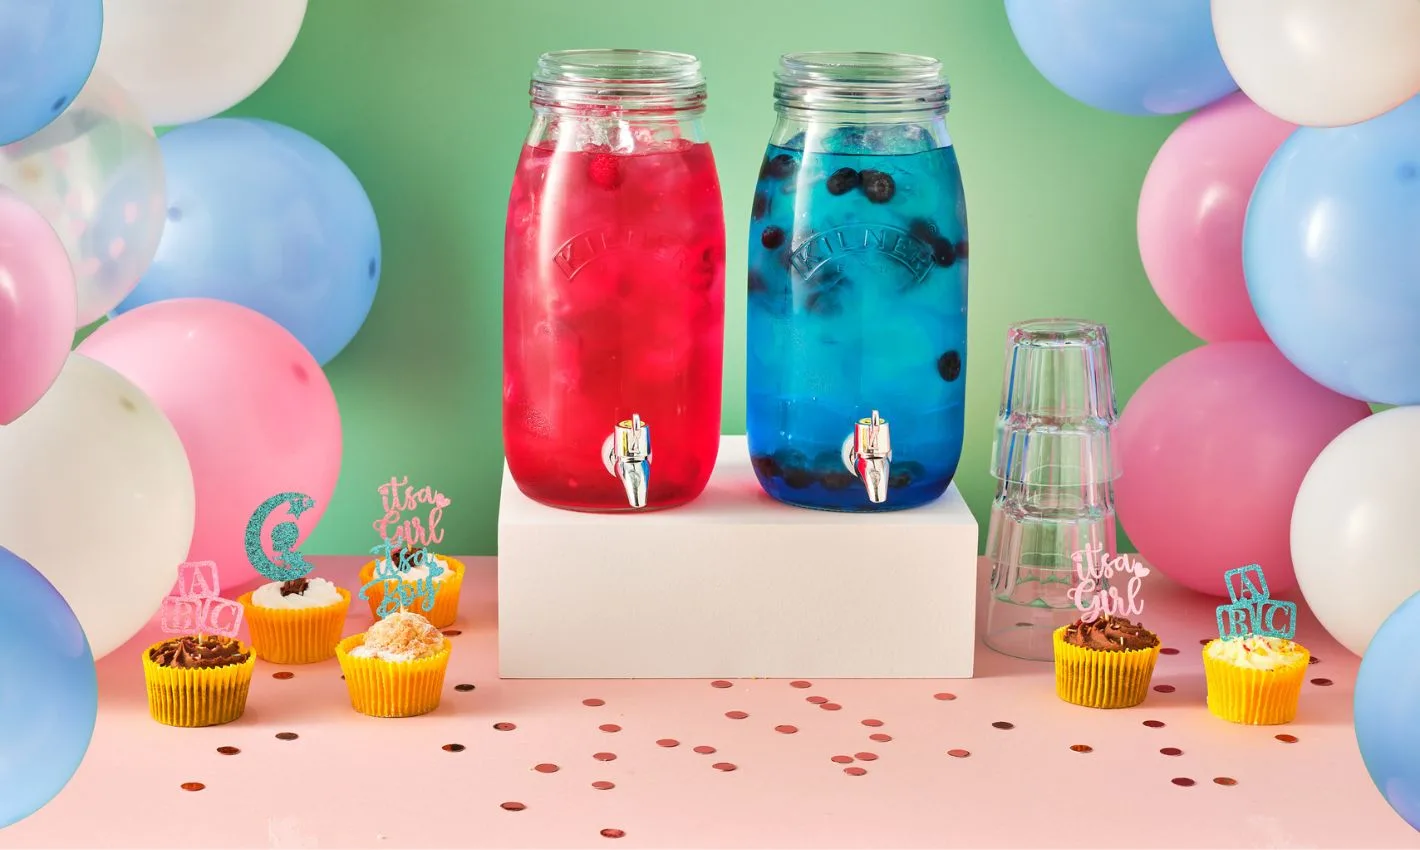 kilner jars filledd with pink or blue cocktails for a baby shower, surrounded by balloons and cupcakes